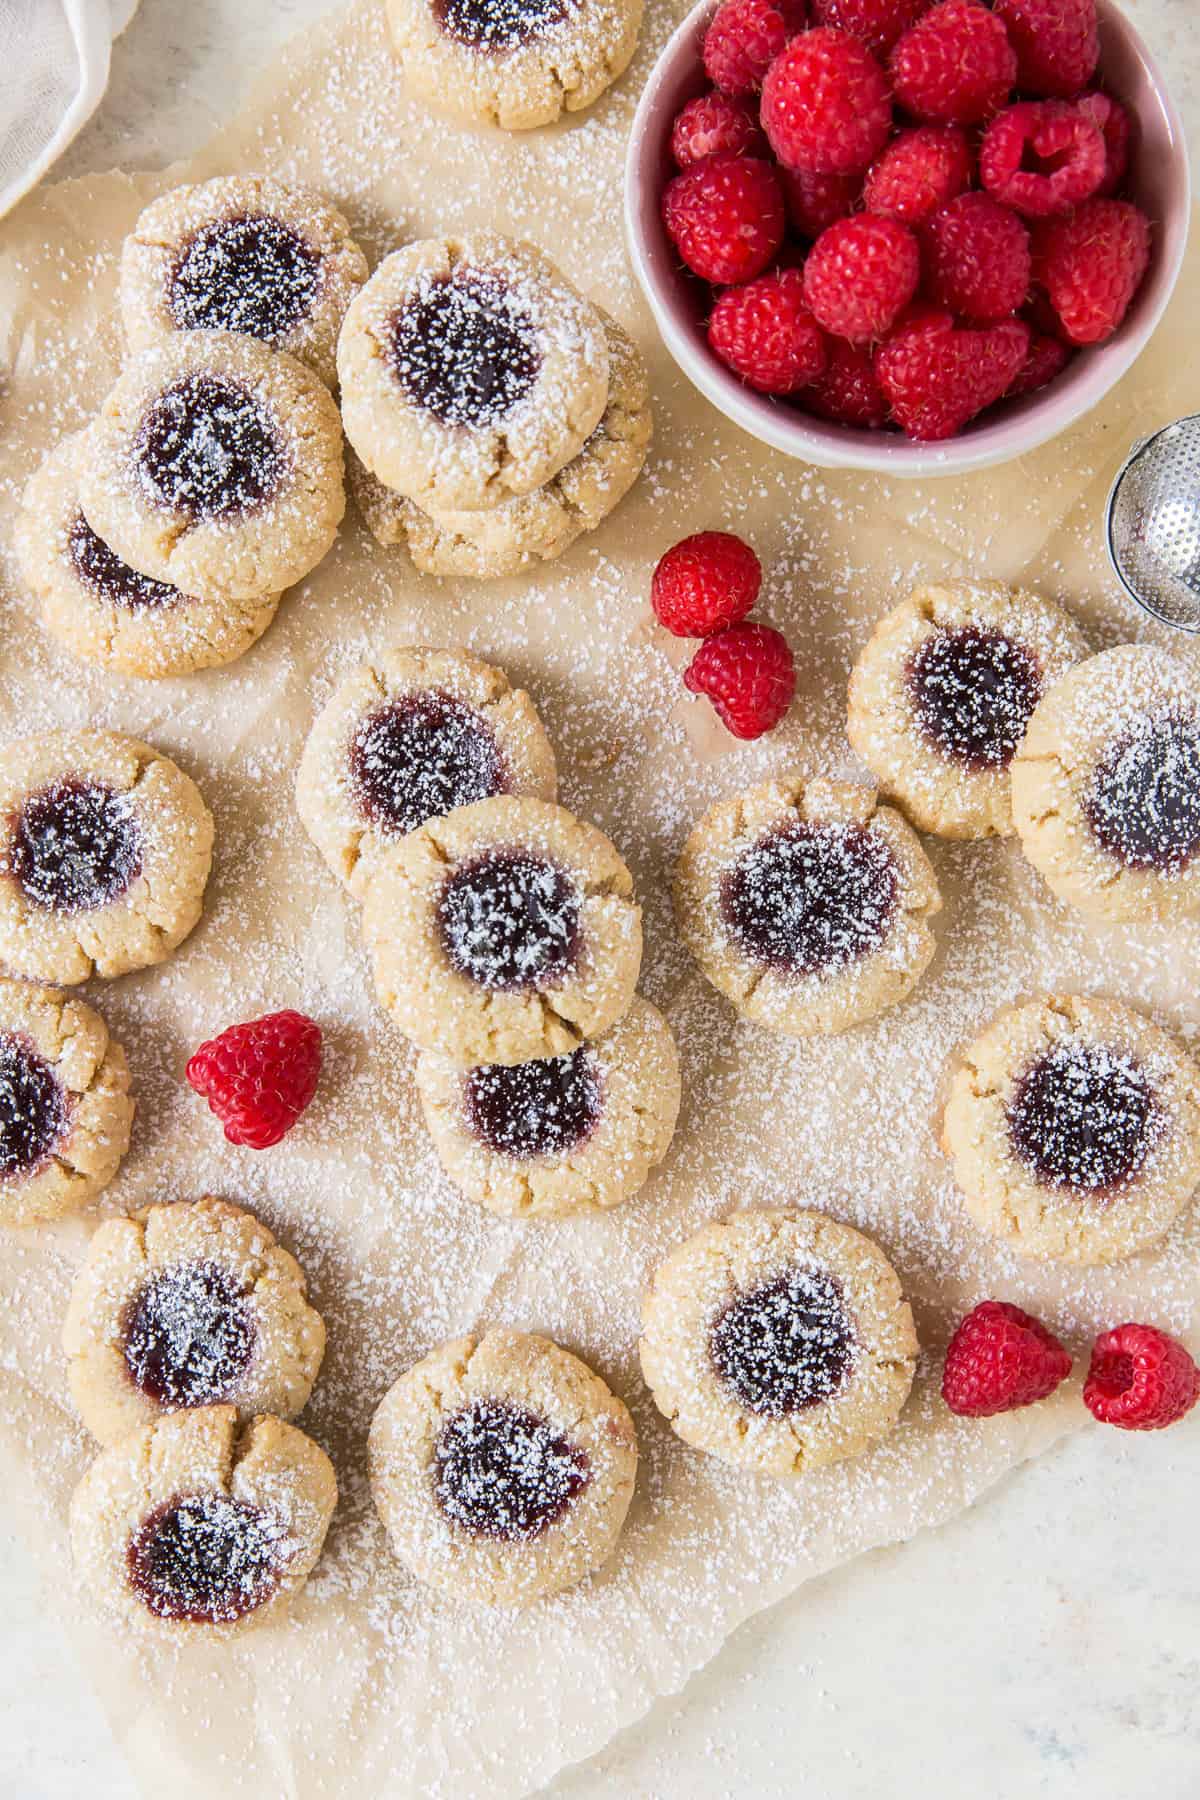 Thumbprint cookies dusted with powdered sugar next to a bowl of raspberries.